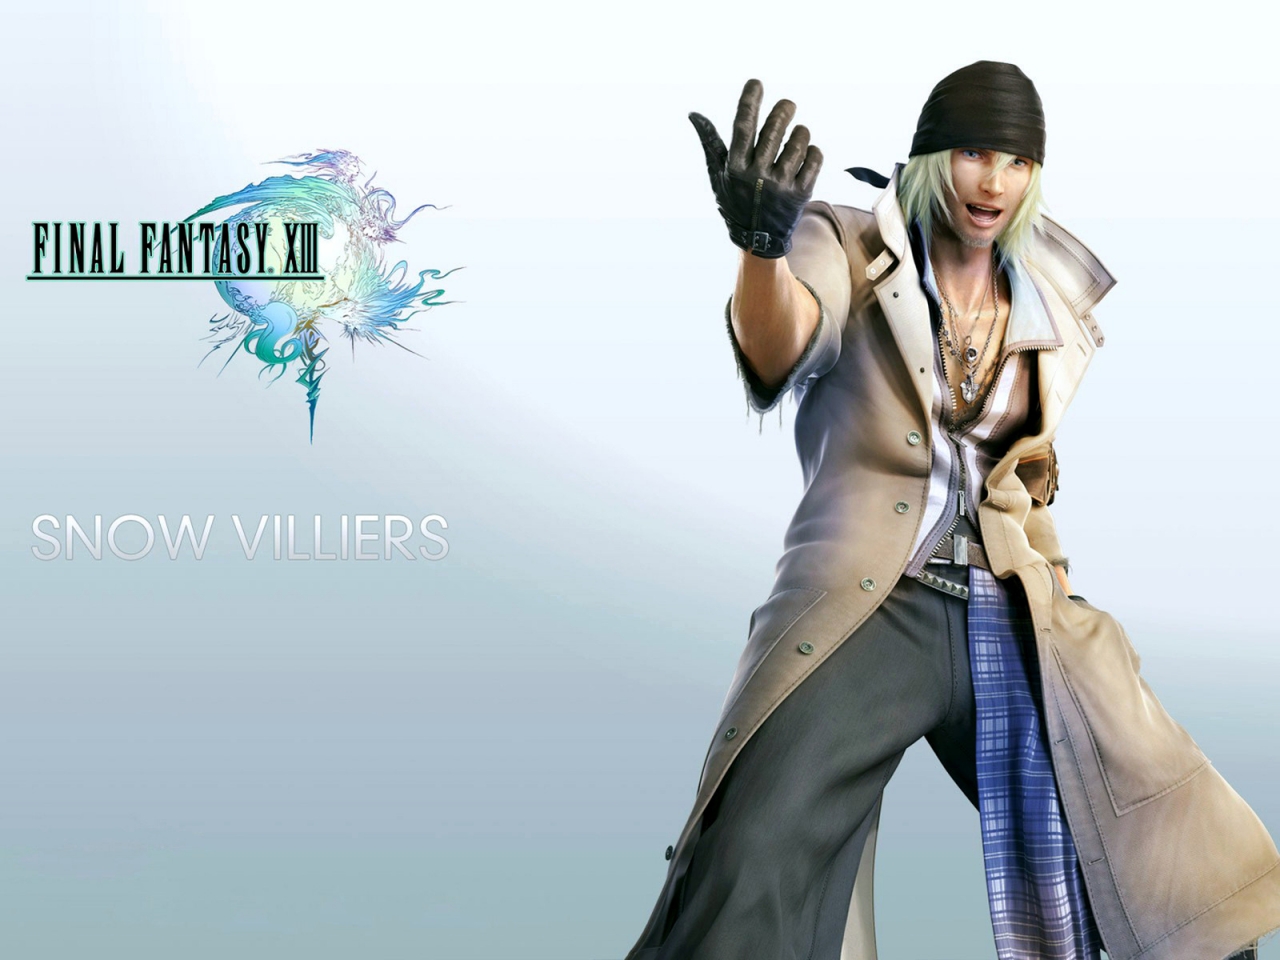 Final Fantasy XIII Snow Villiers for 1280 x 960 resolution